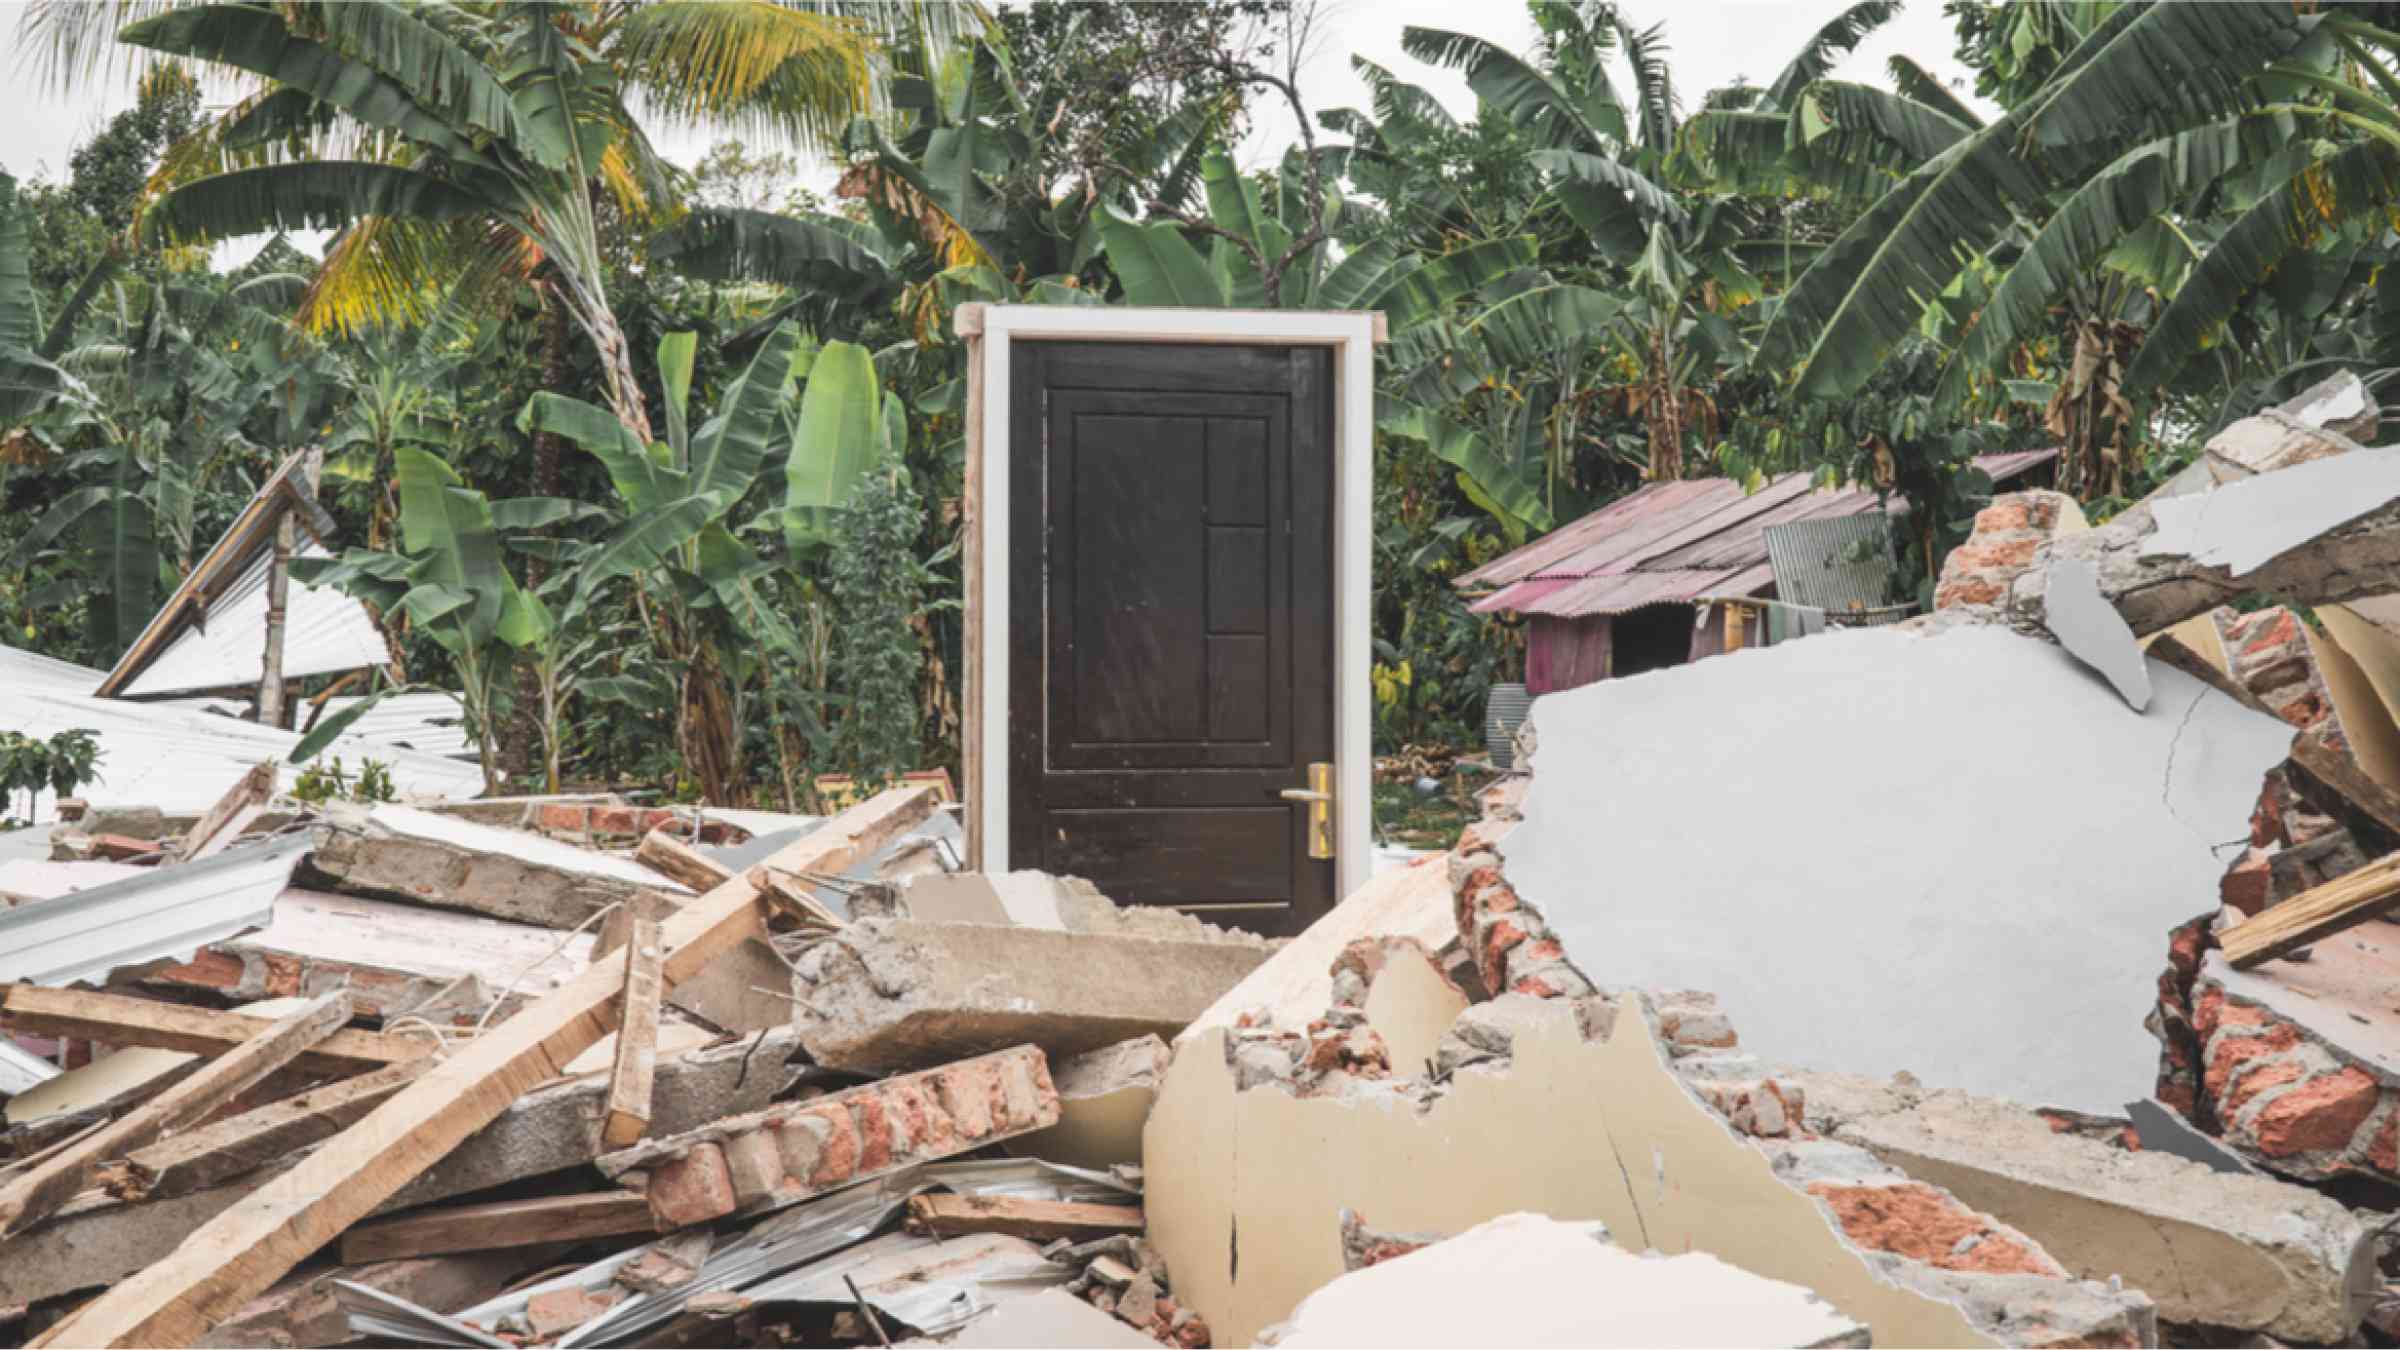 Permanent door of the destroyed house after the earthquake disaster in Lombok, Indonesia